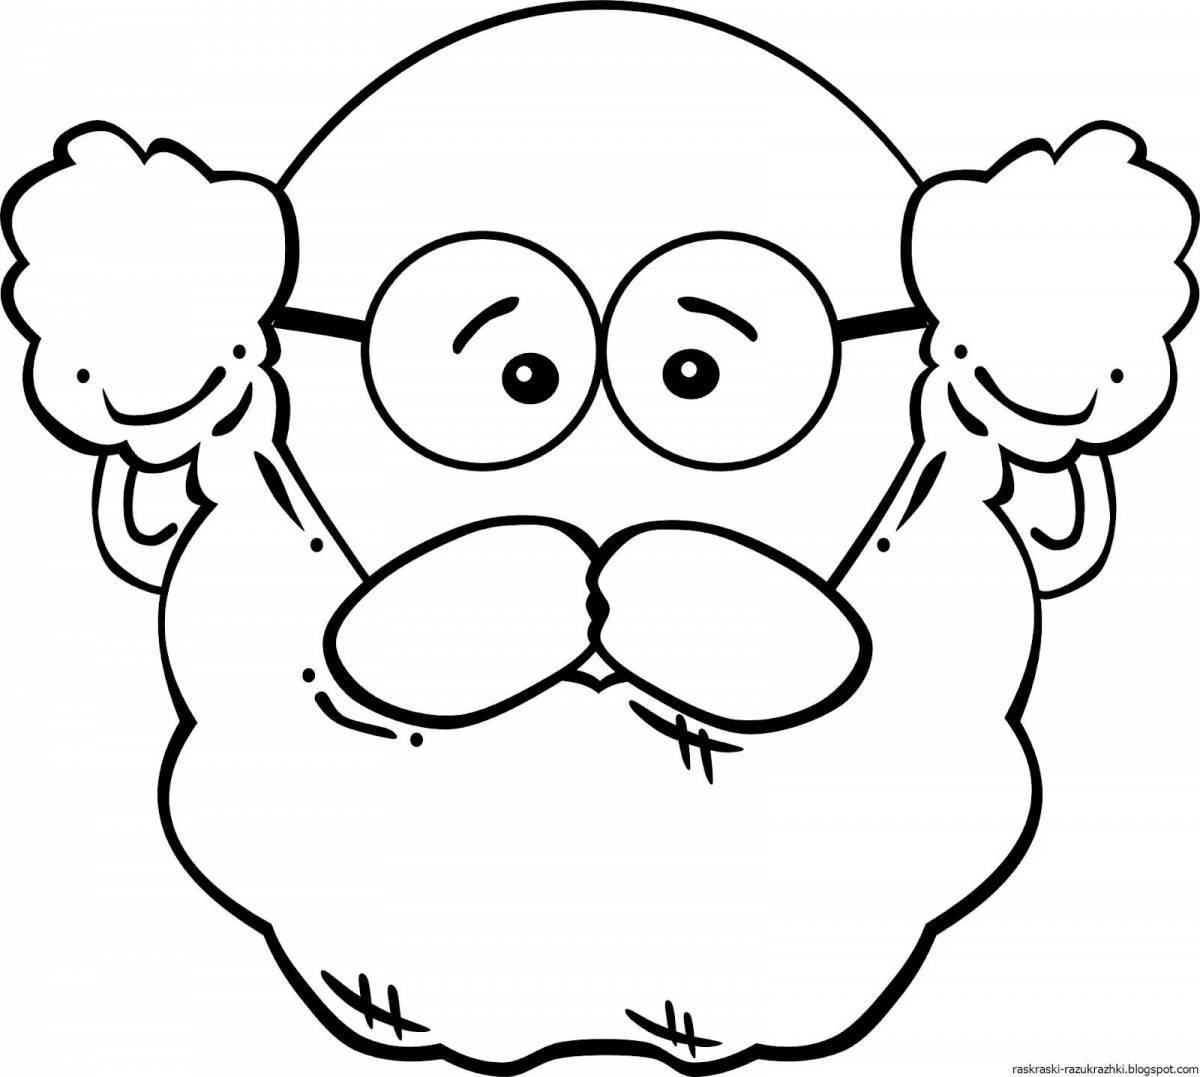 Coloring book loving grandfather for kids